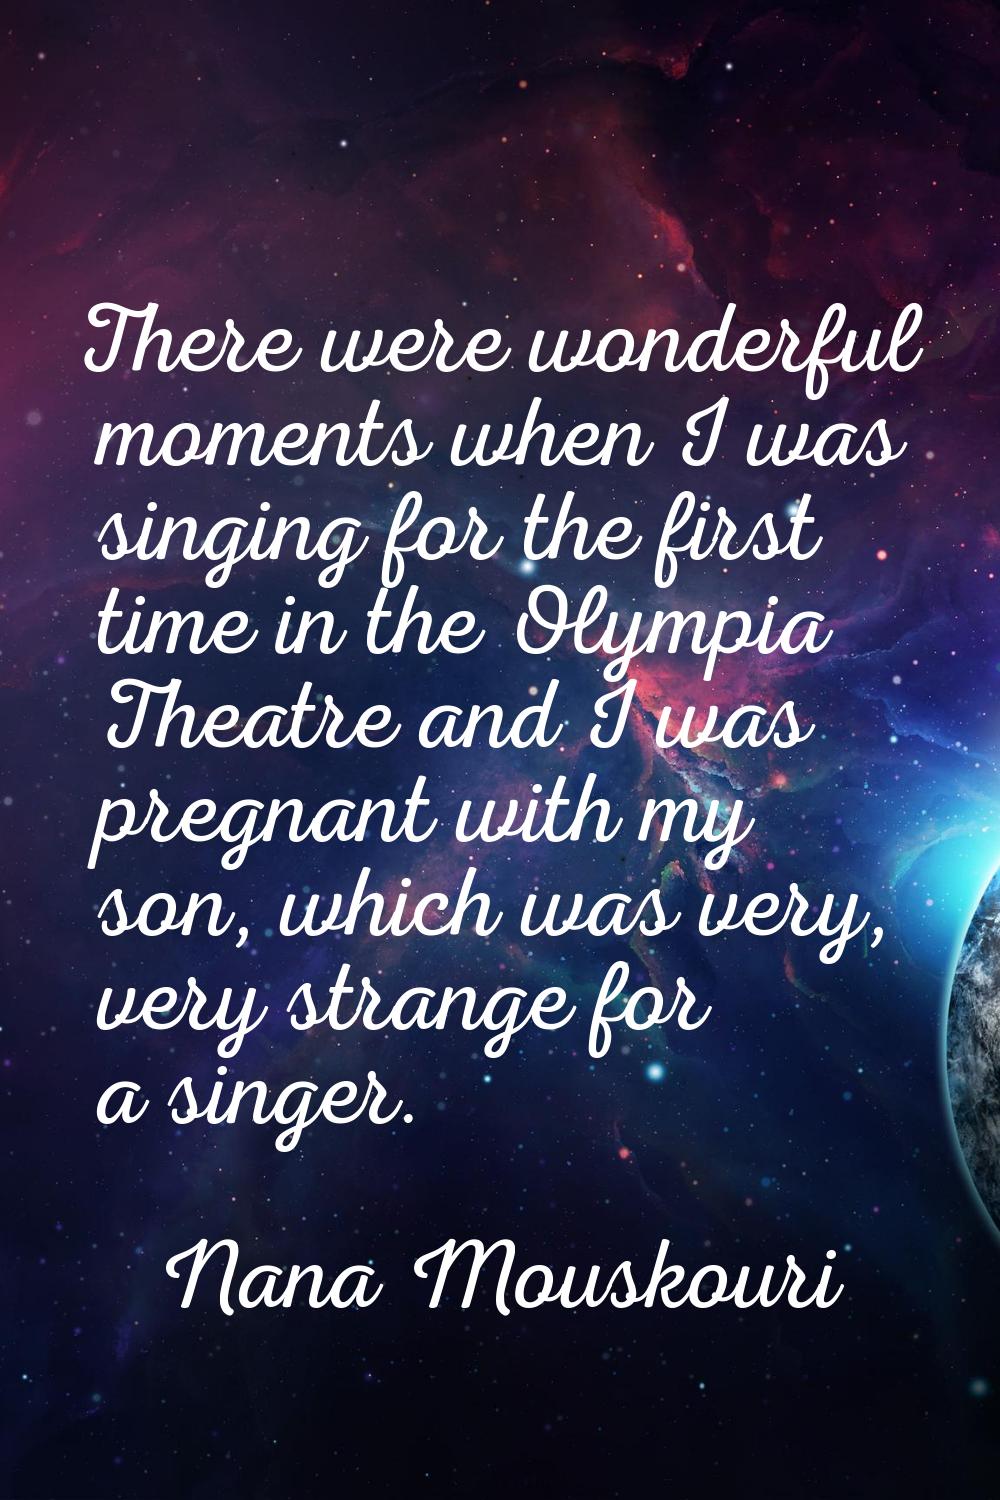 There were wonderful moments when I was singing for the first time in the Olympia Theatre and I was